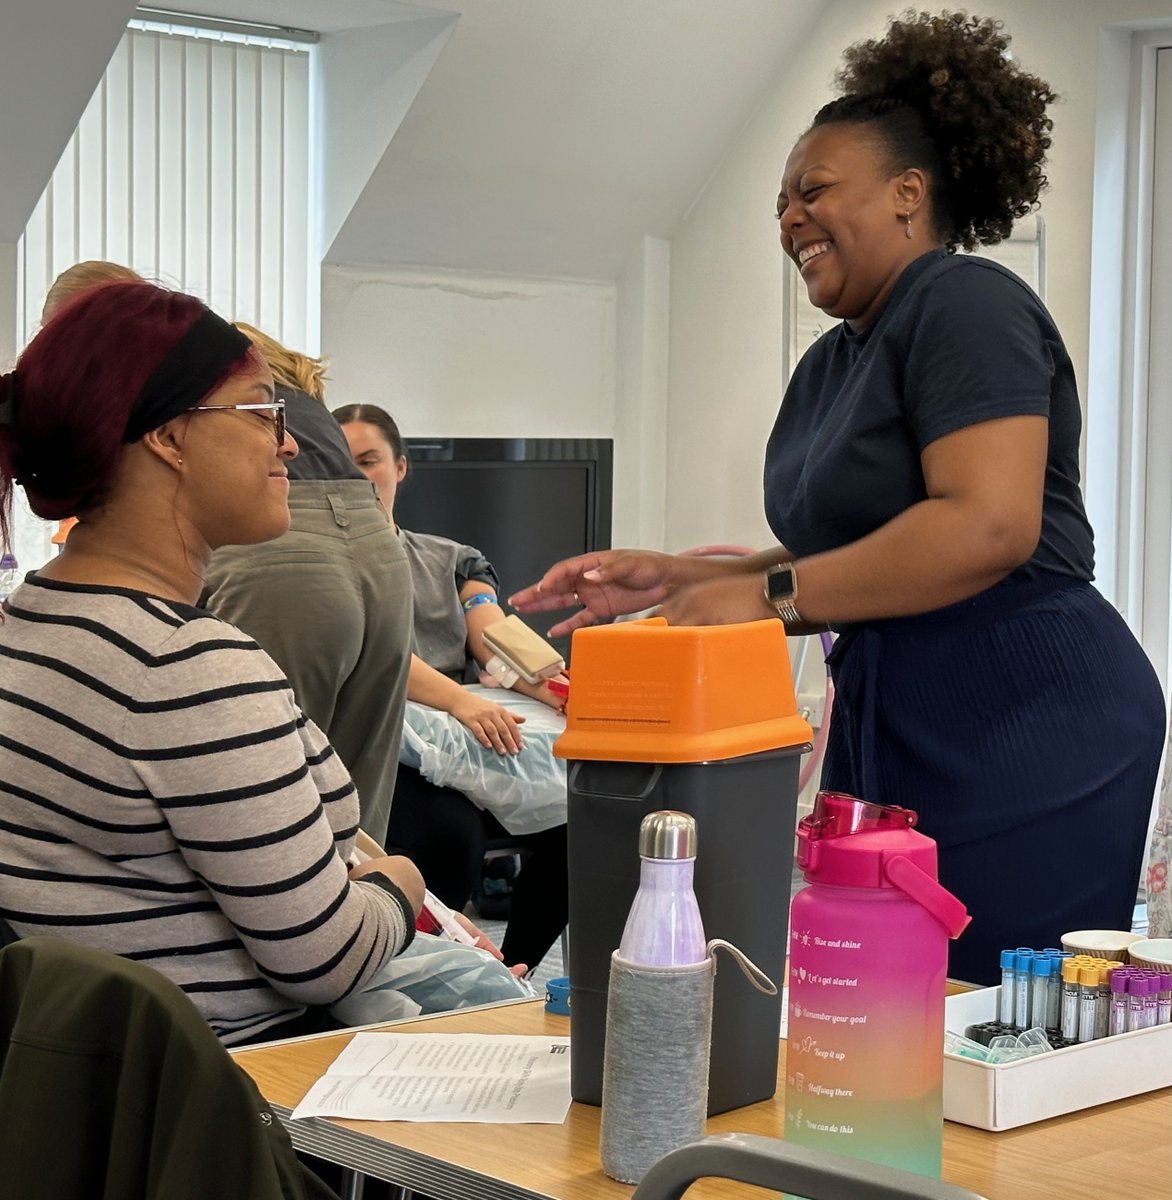 We offer #accredited #phlebotomy #training at weekends in venues across the UK For more information and to book your place see phlebotomytraining.co.uk/basic-phleboto…